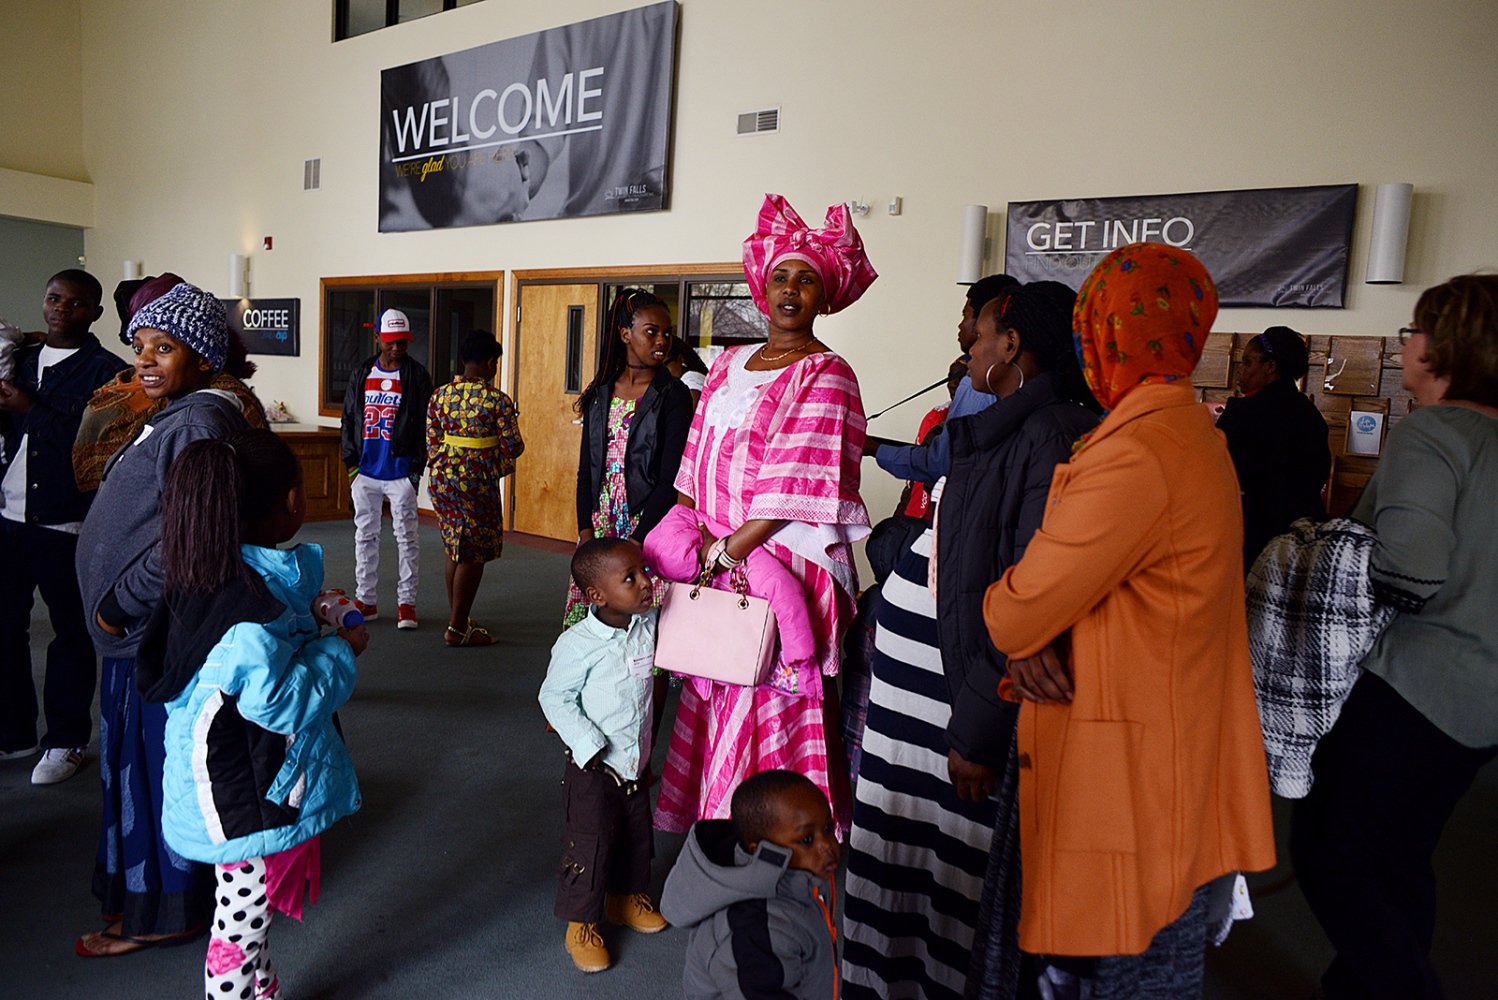 Welcome to Twin Falls, Idaho - Families wait in the lobby after Congolese prayer...